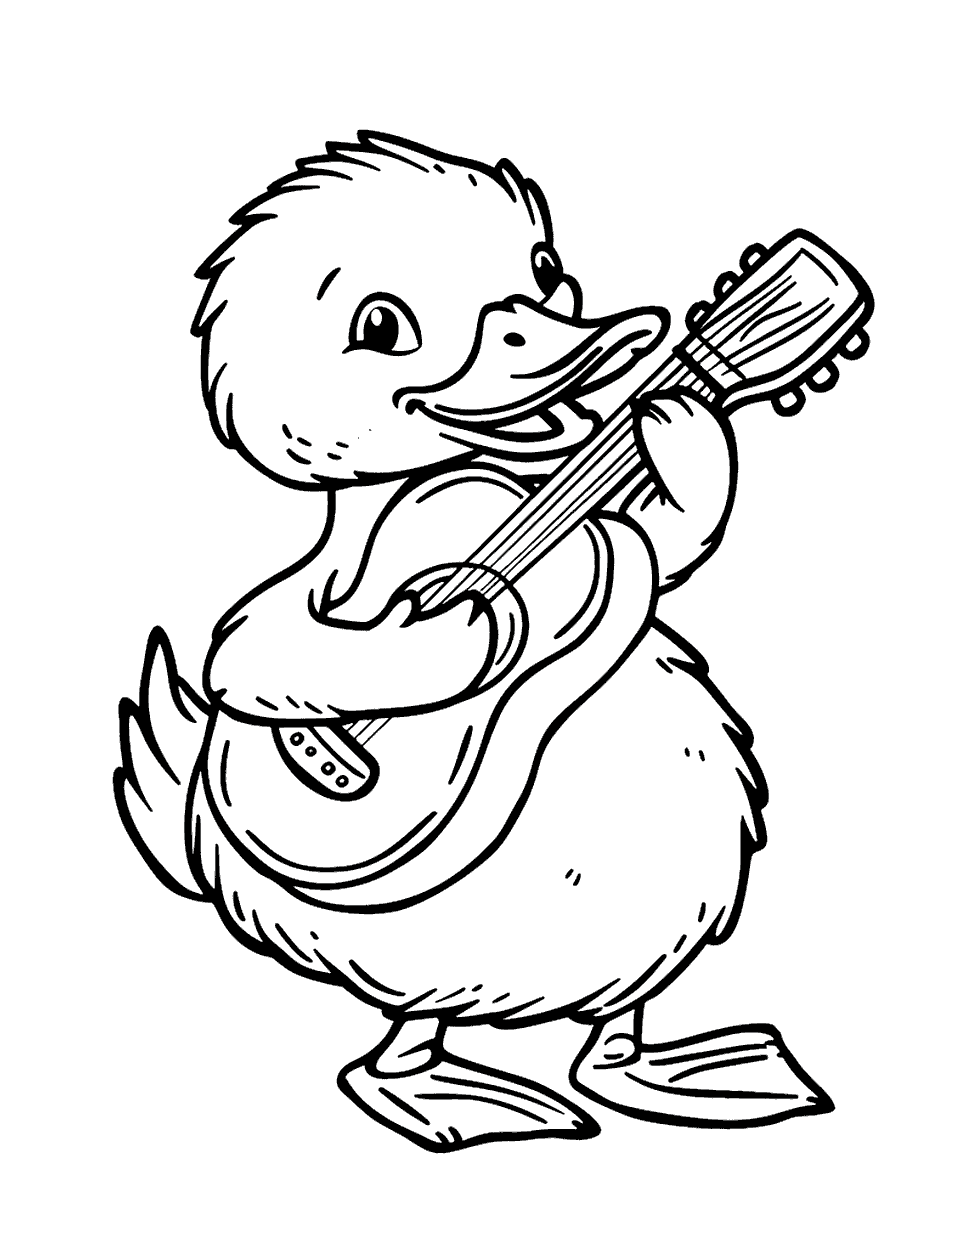 Duck Playing a Guitar Coloring Page - A musical duck strumming a guitar.